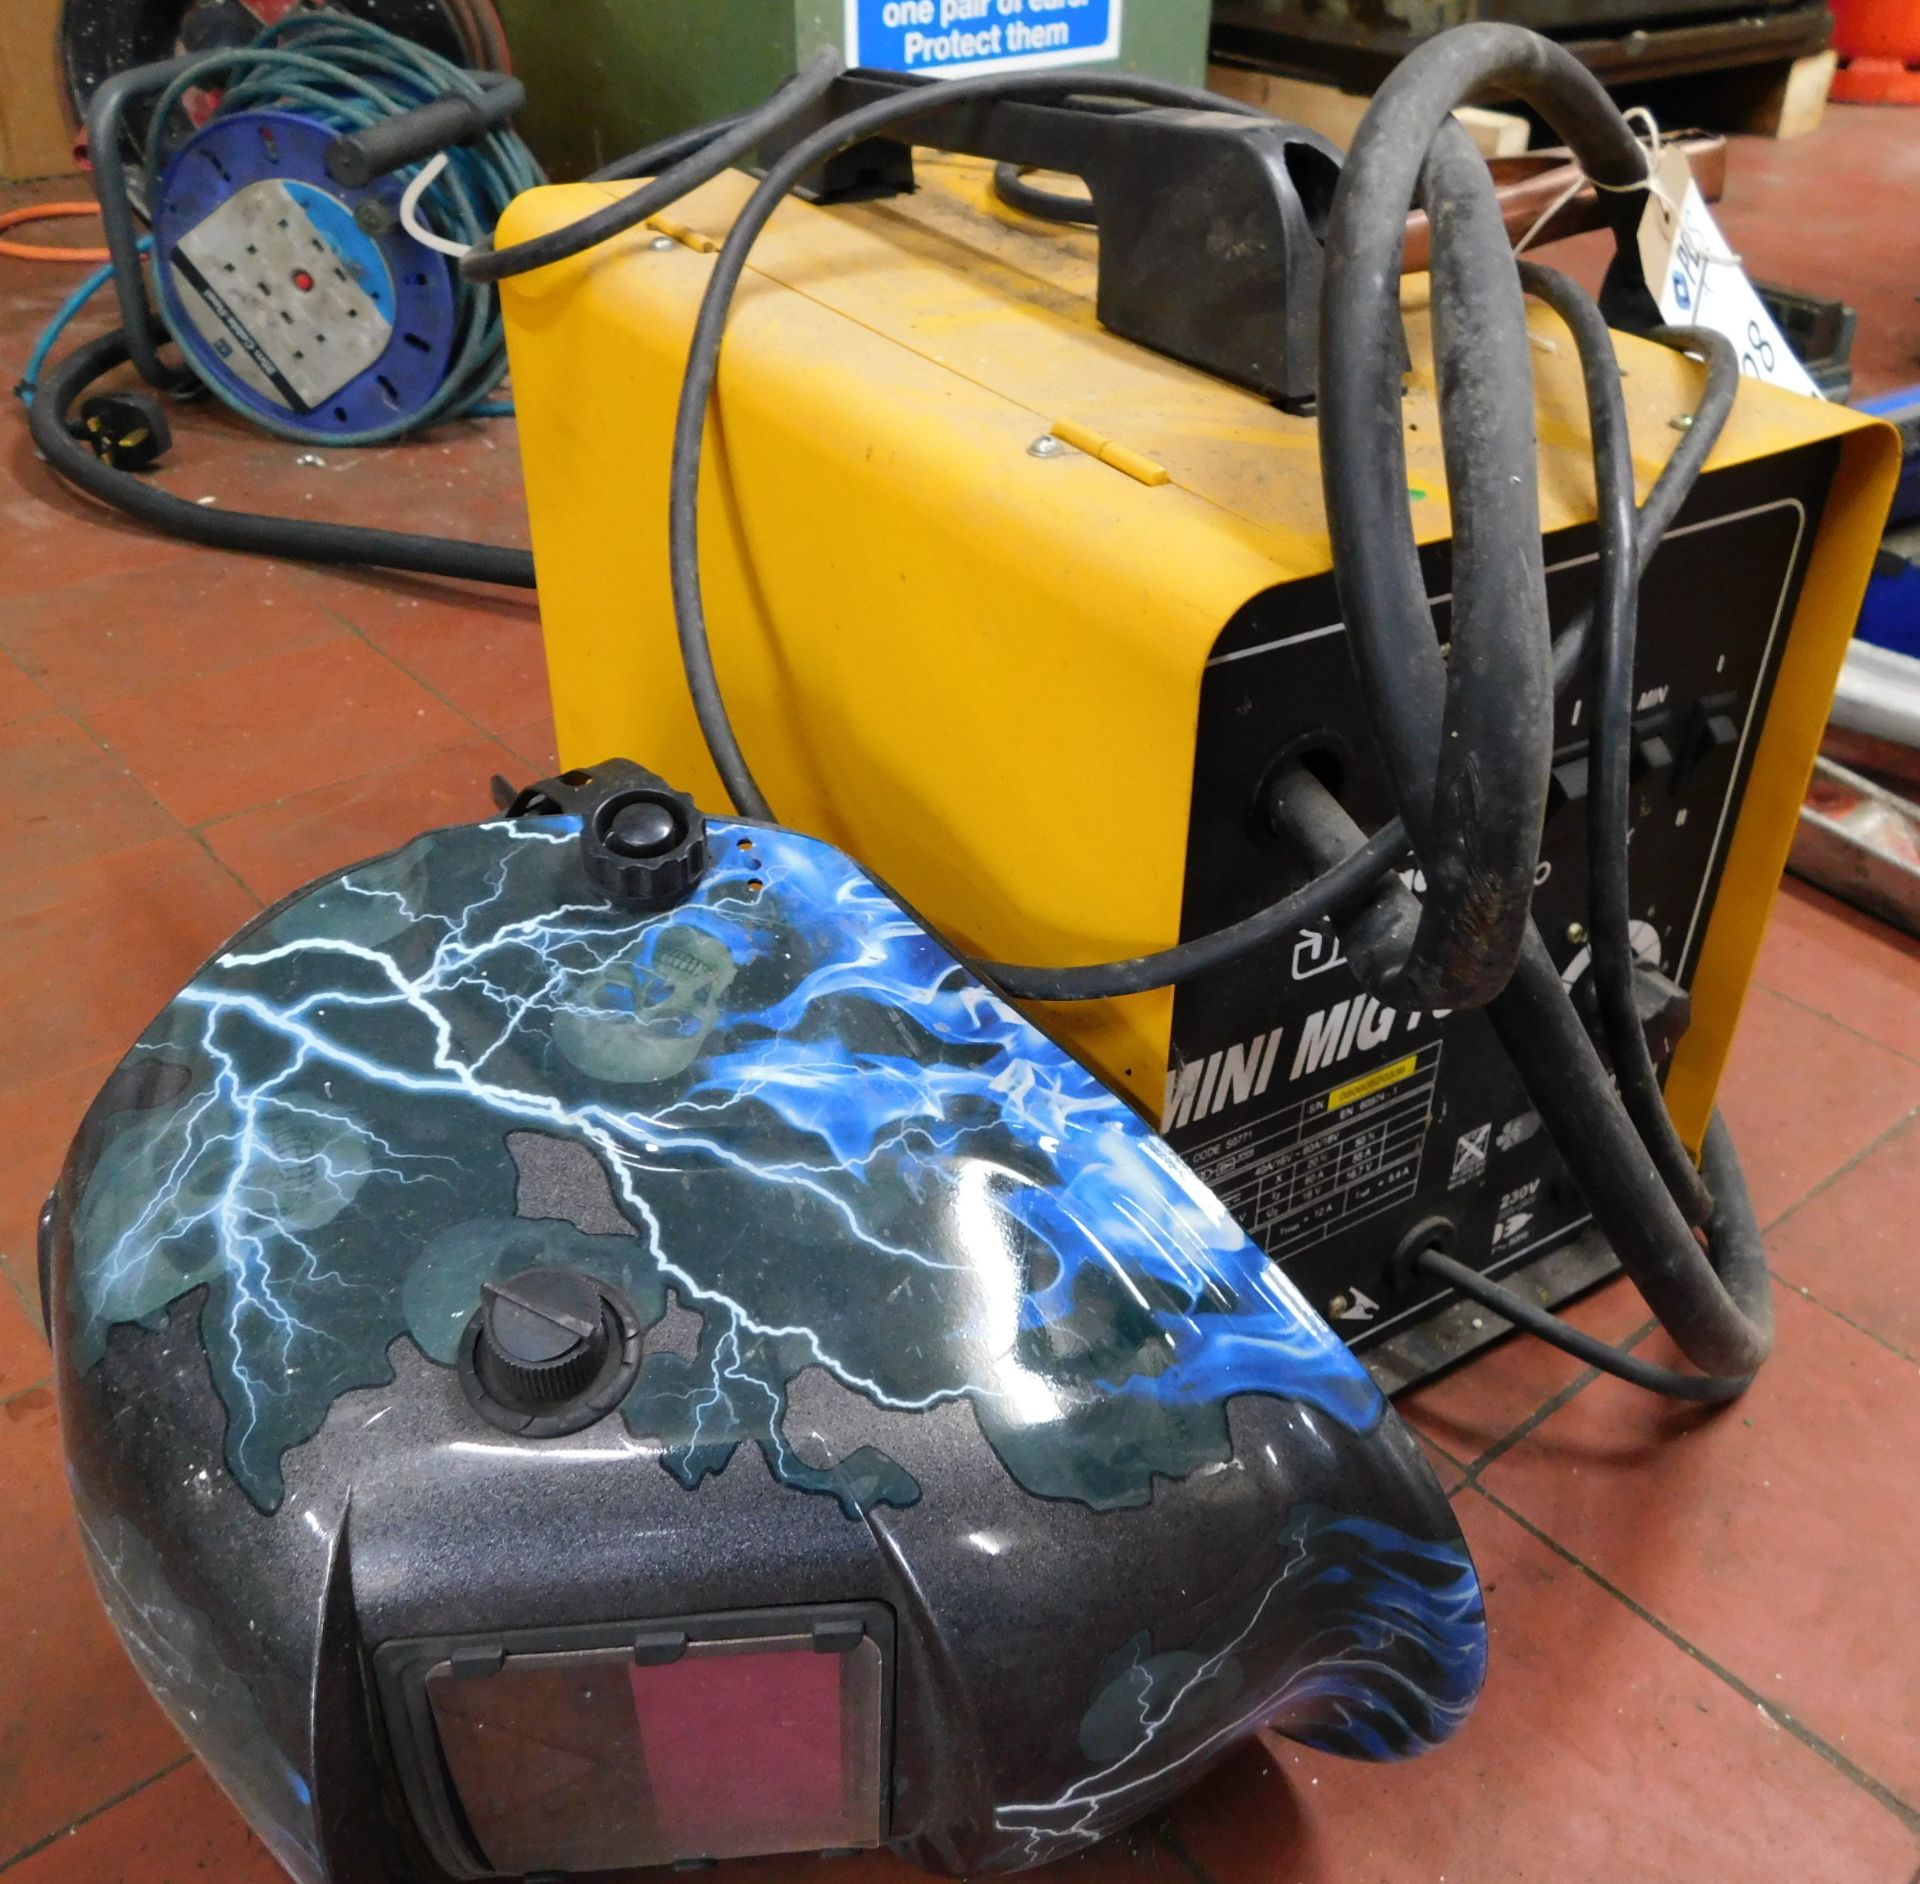 Siegen Power Mini Mig 130 Welder & Welding Mask (Location: Bolton. Please Refer to General Notes) - Image 2 of 4